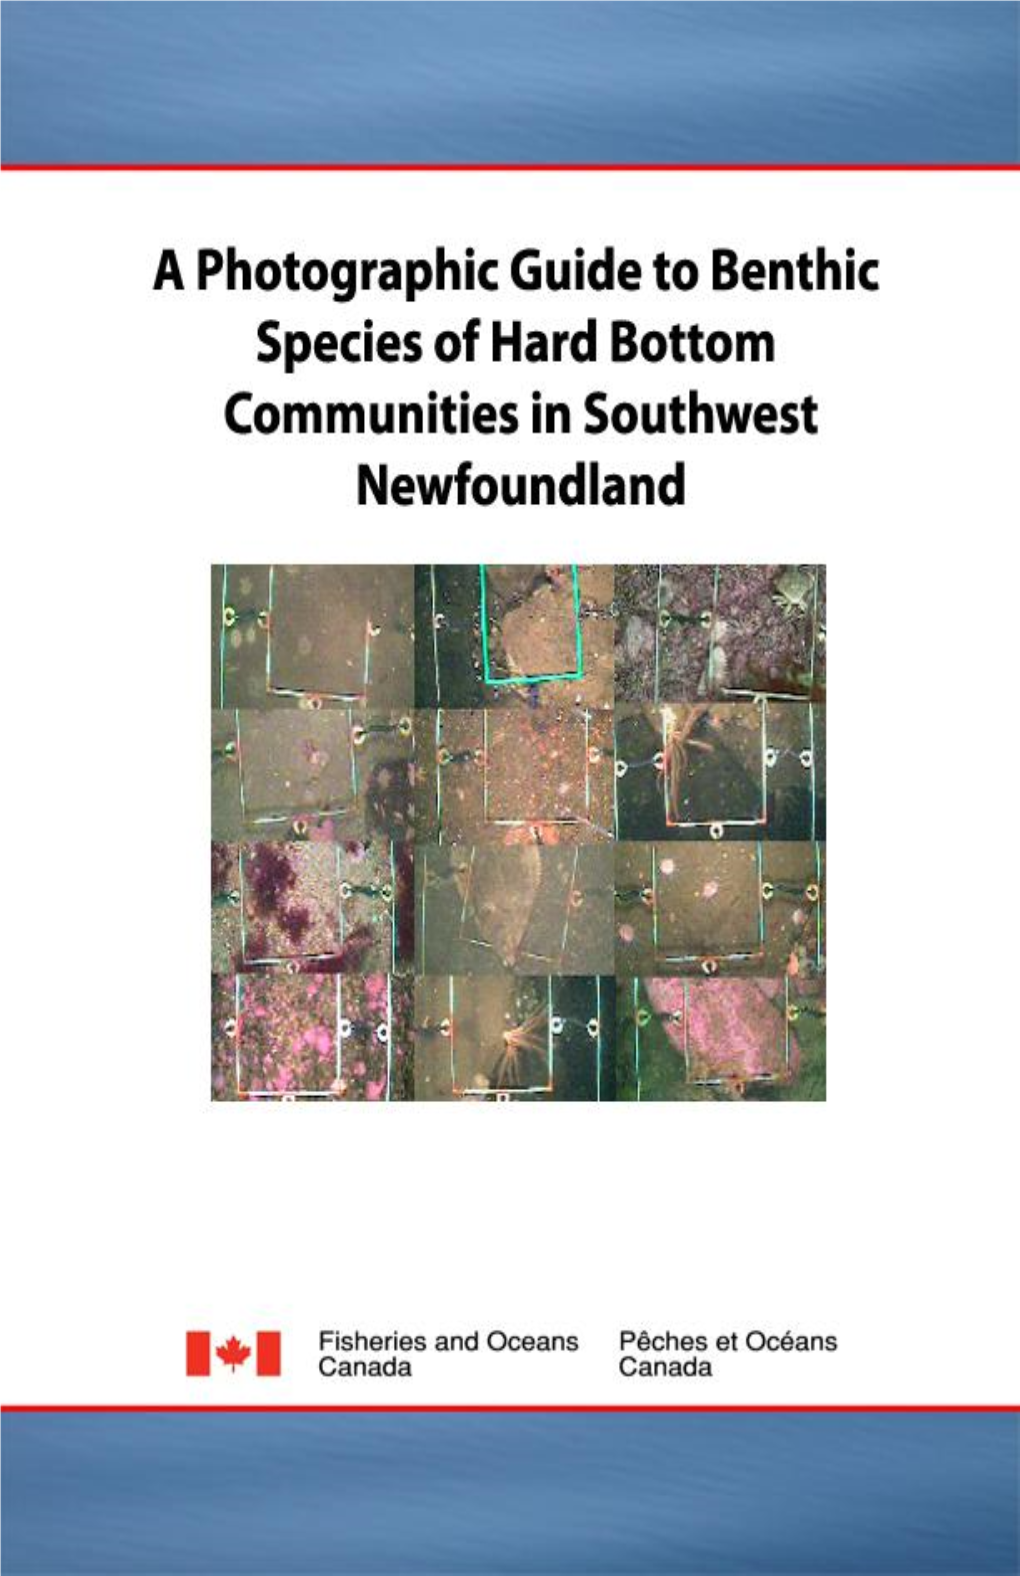 A Photographic Guide to Benthic Species of Hard Bottom Communities